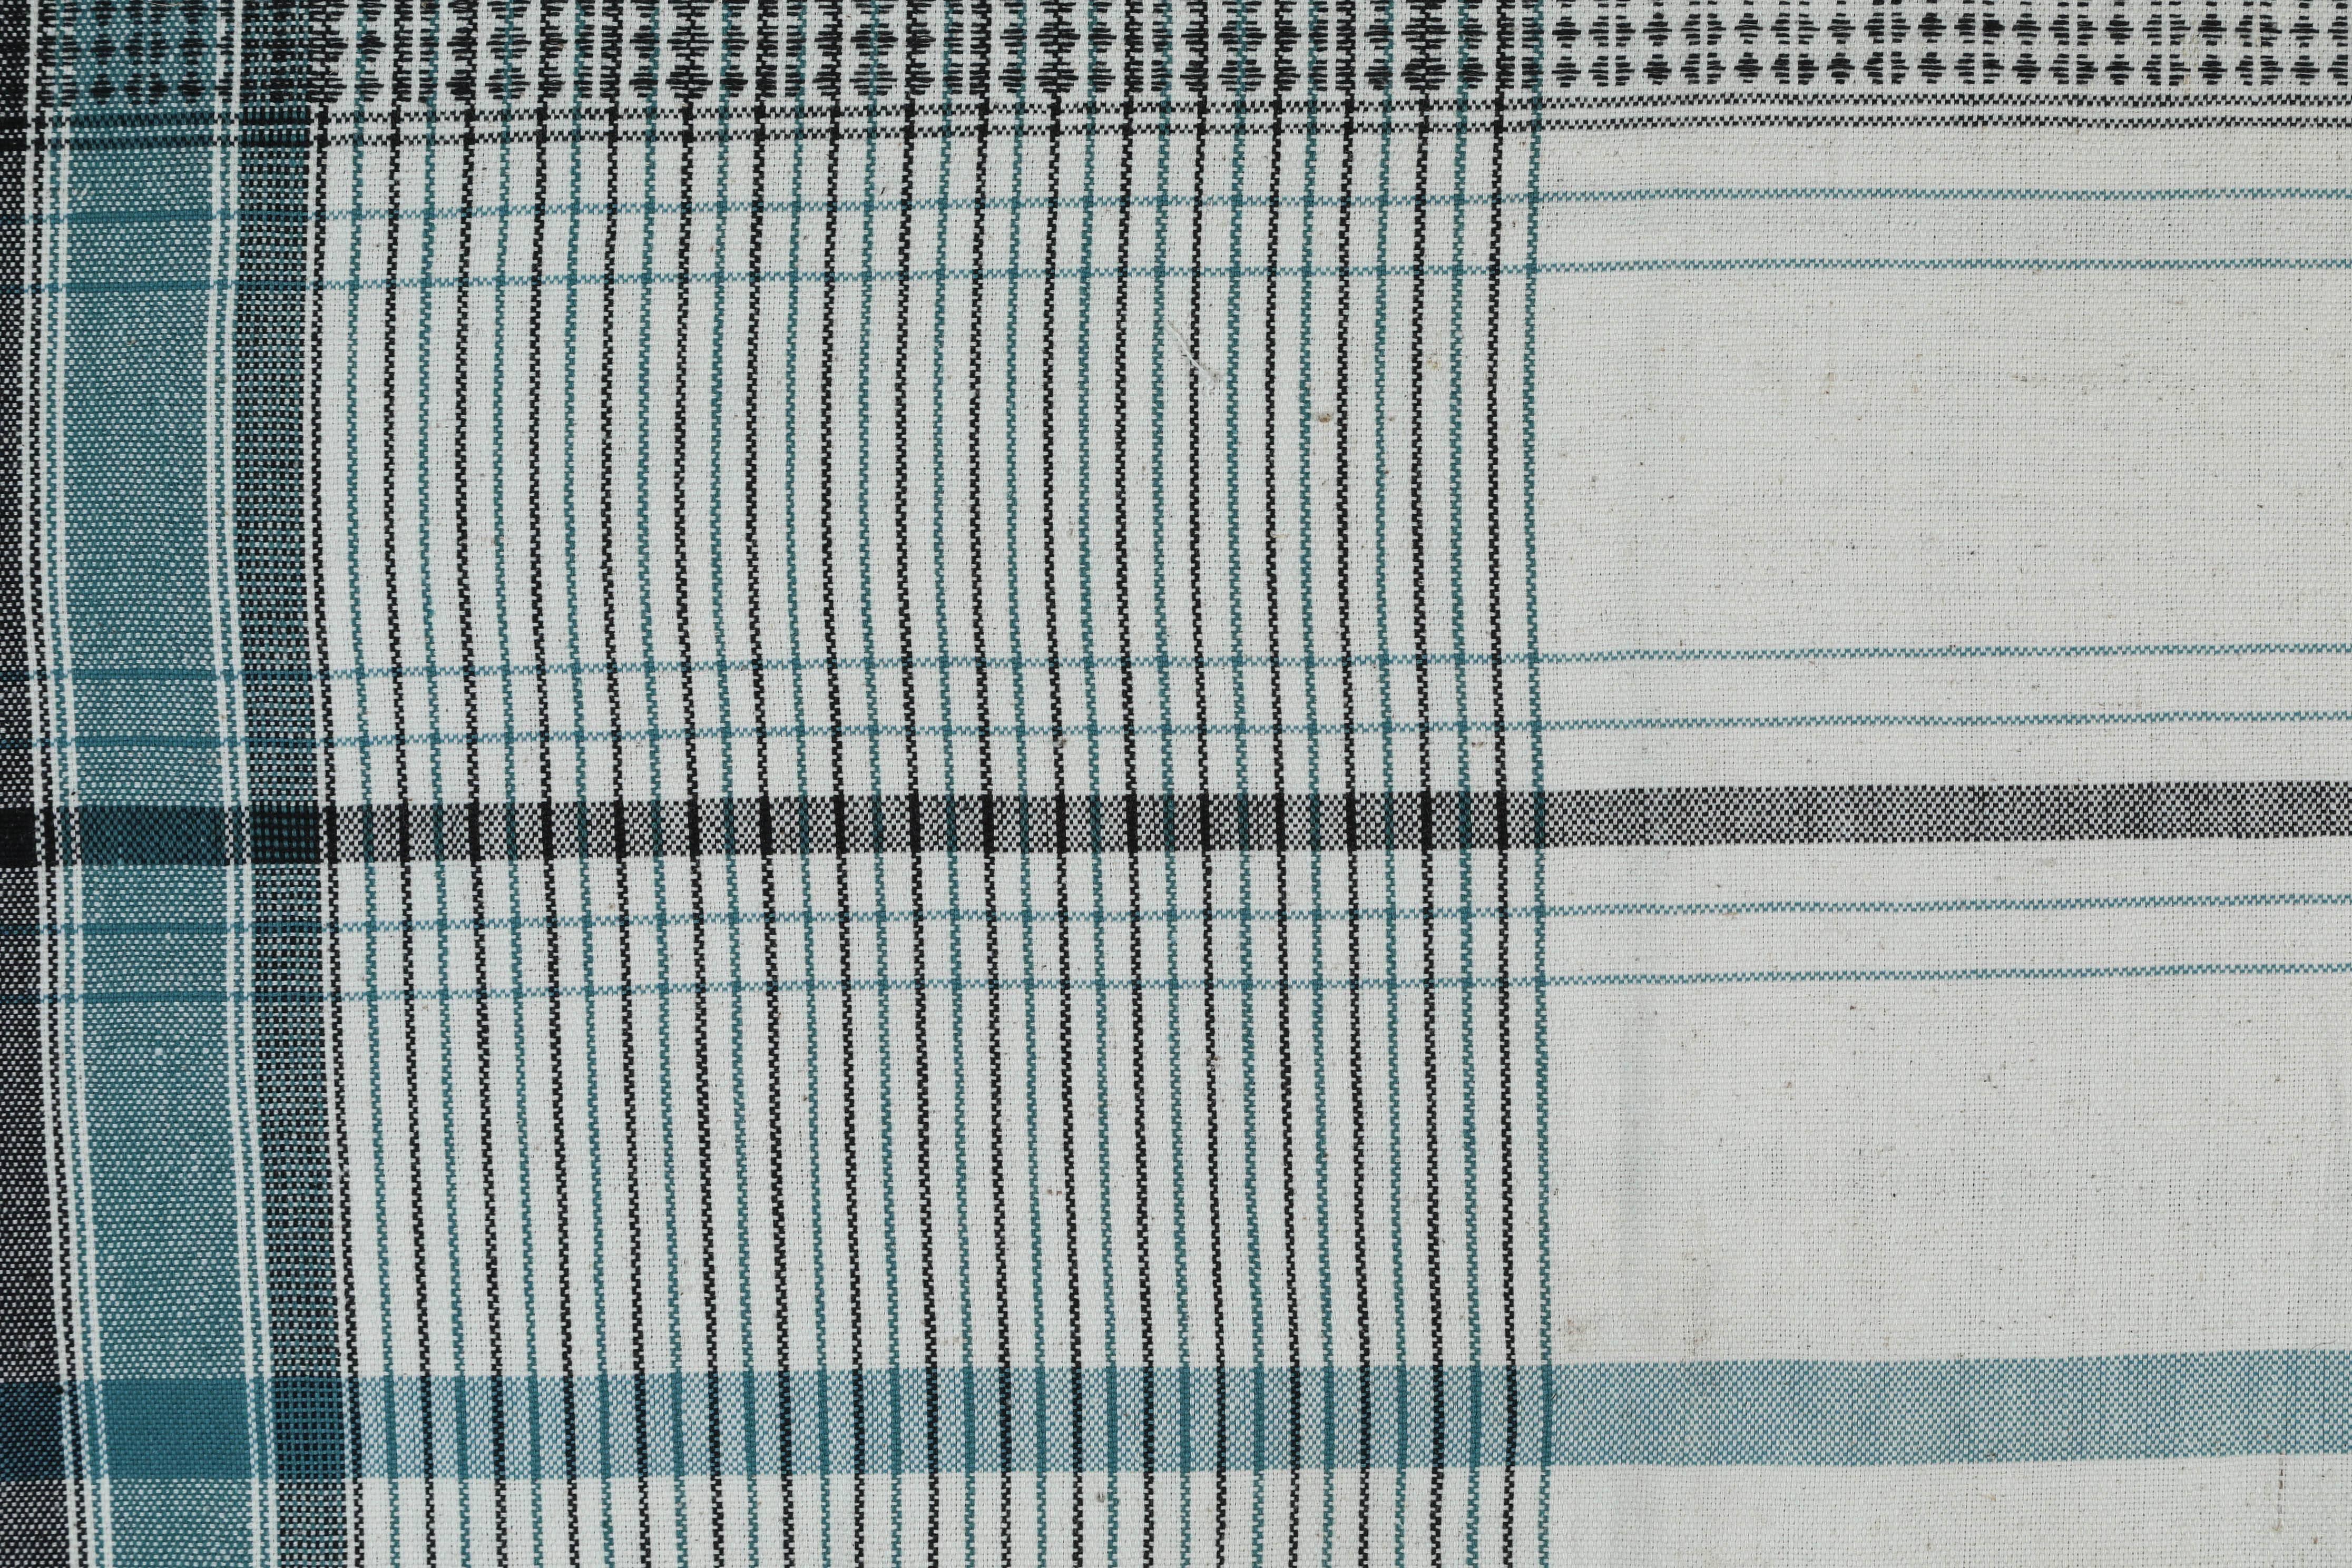 Kala naturally dyed organic cotton from Gujarat, India. Hand loomed using traditional Indian textile techniques to produce extra weft woven stripes and plaids. This ivory, slate blue and black bedcover has added hand-knotted tassels.